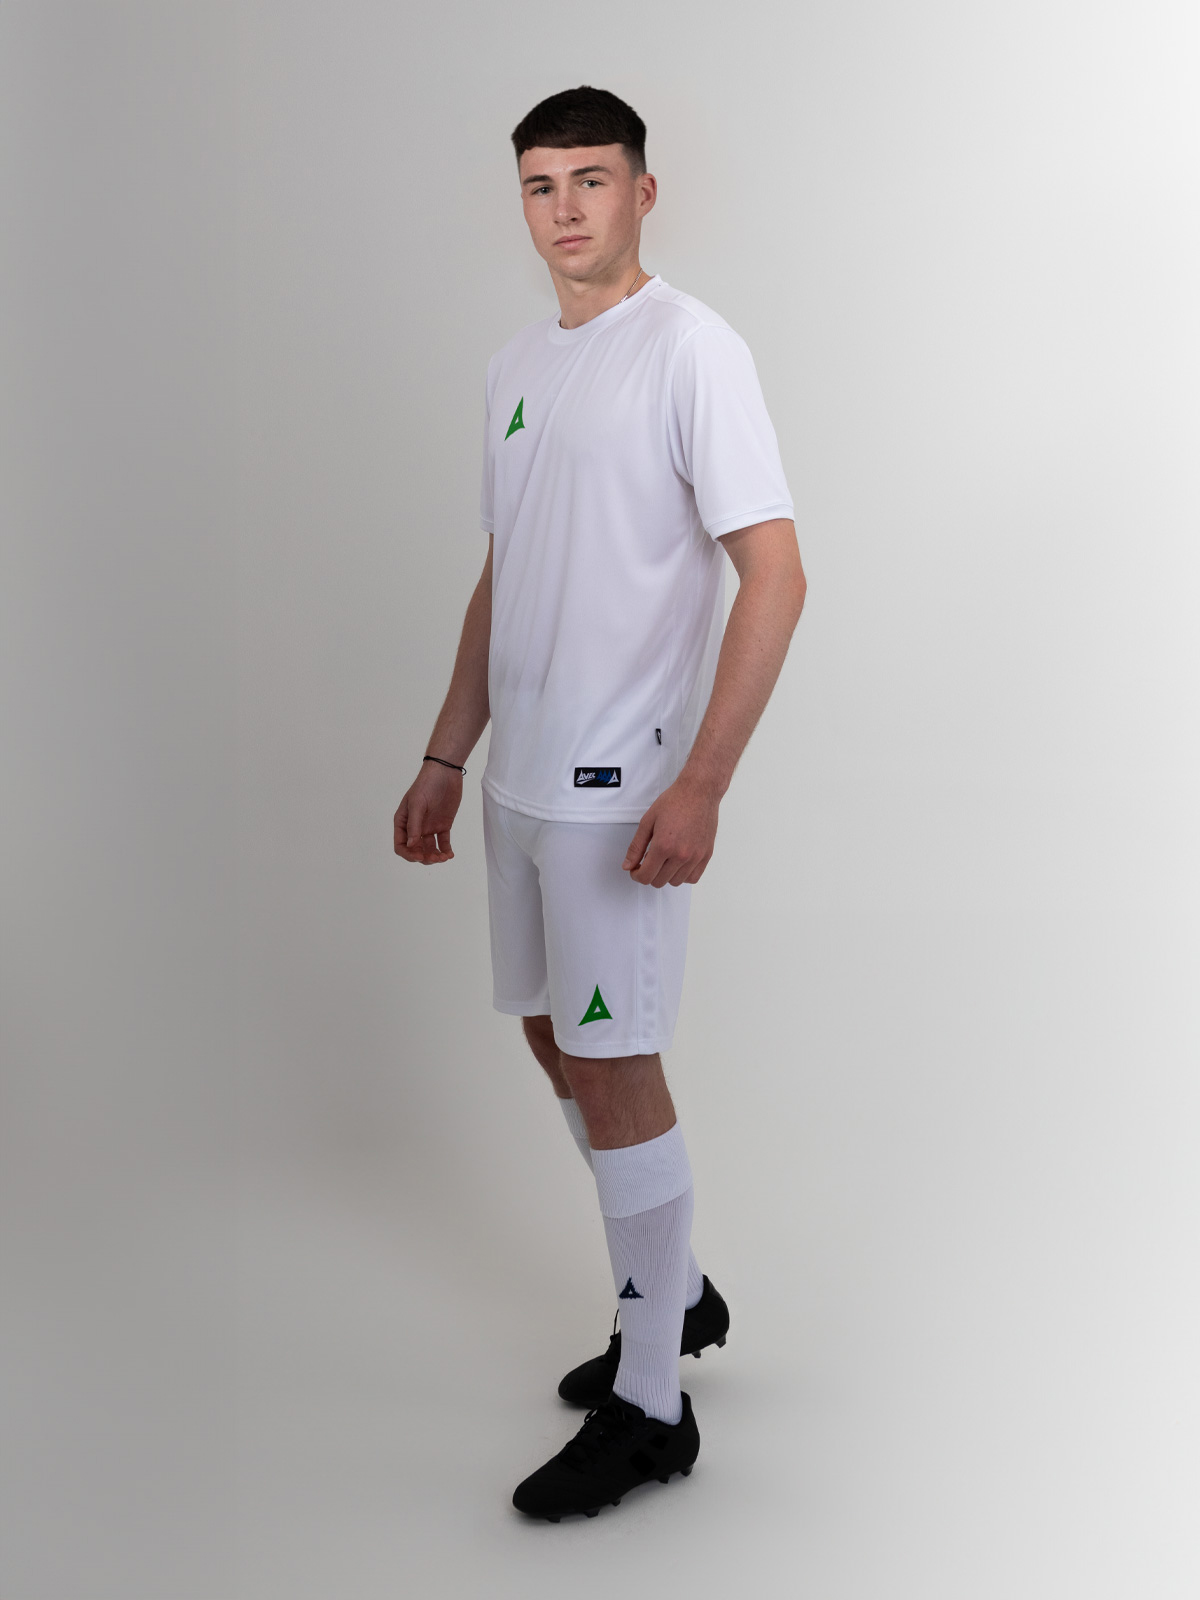 the man in the image is wearing white shorts with a green logo